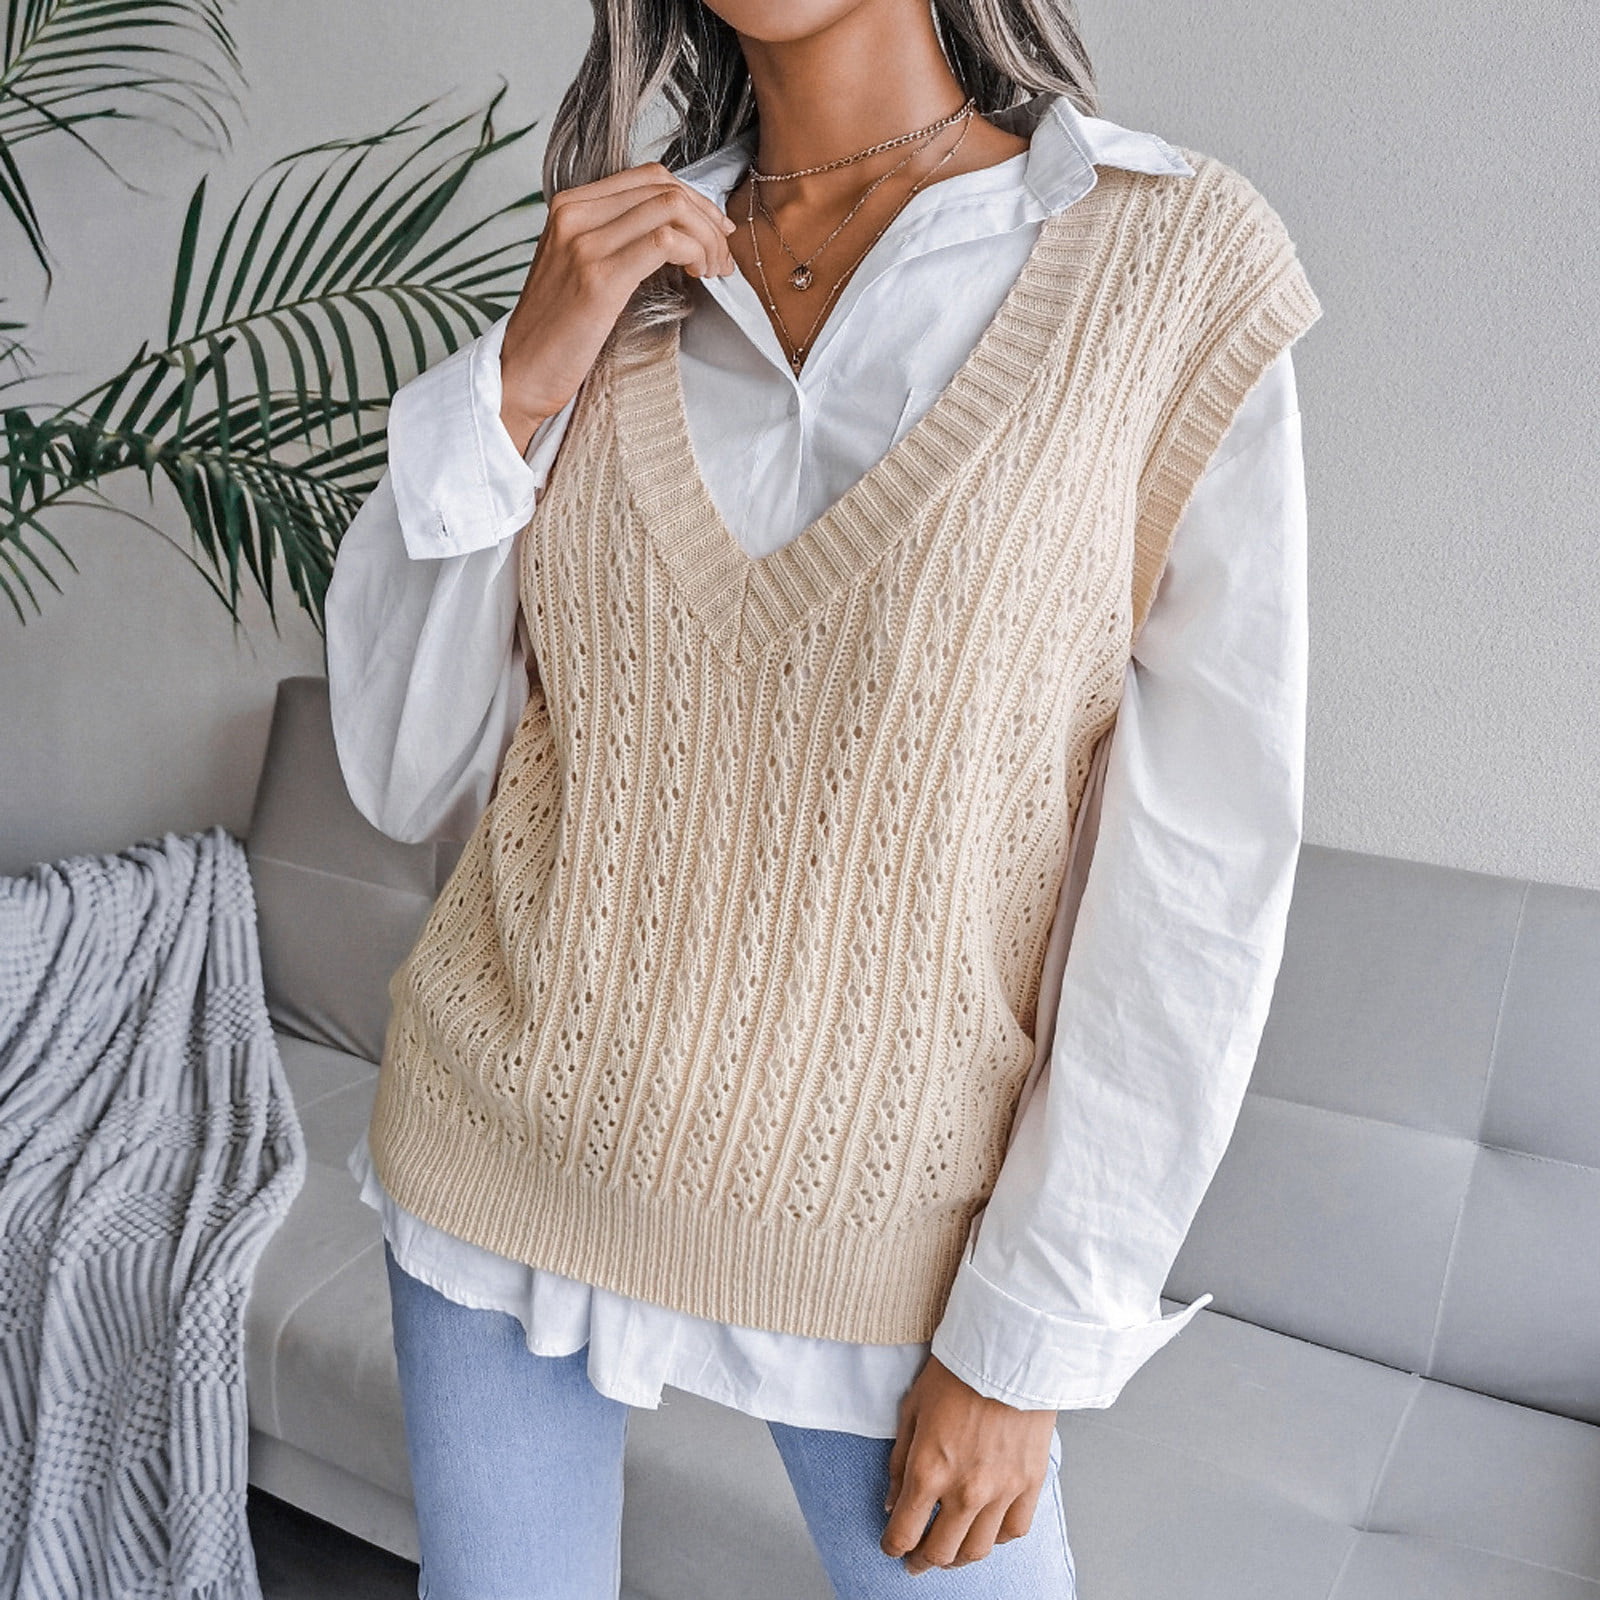 KaLI_store Womens Sweaters Women's Sweater Vest Casual Sleeveless Cardigan  V-Neck Button Down Cotton Vest with Pockets - Walmart.com